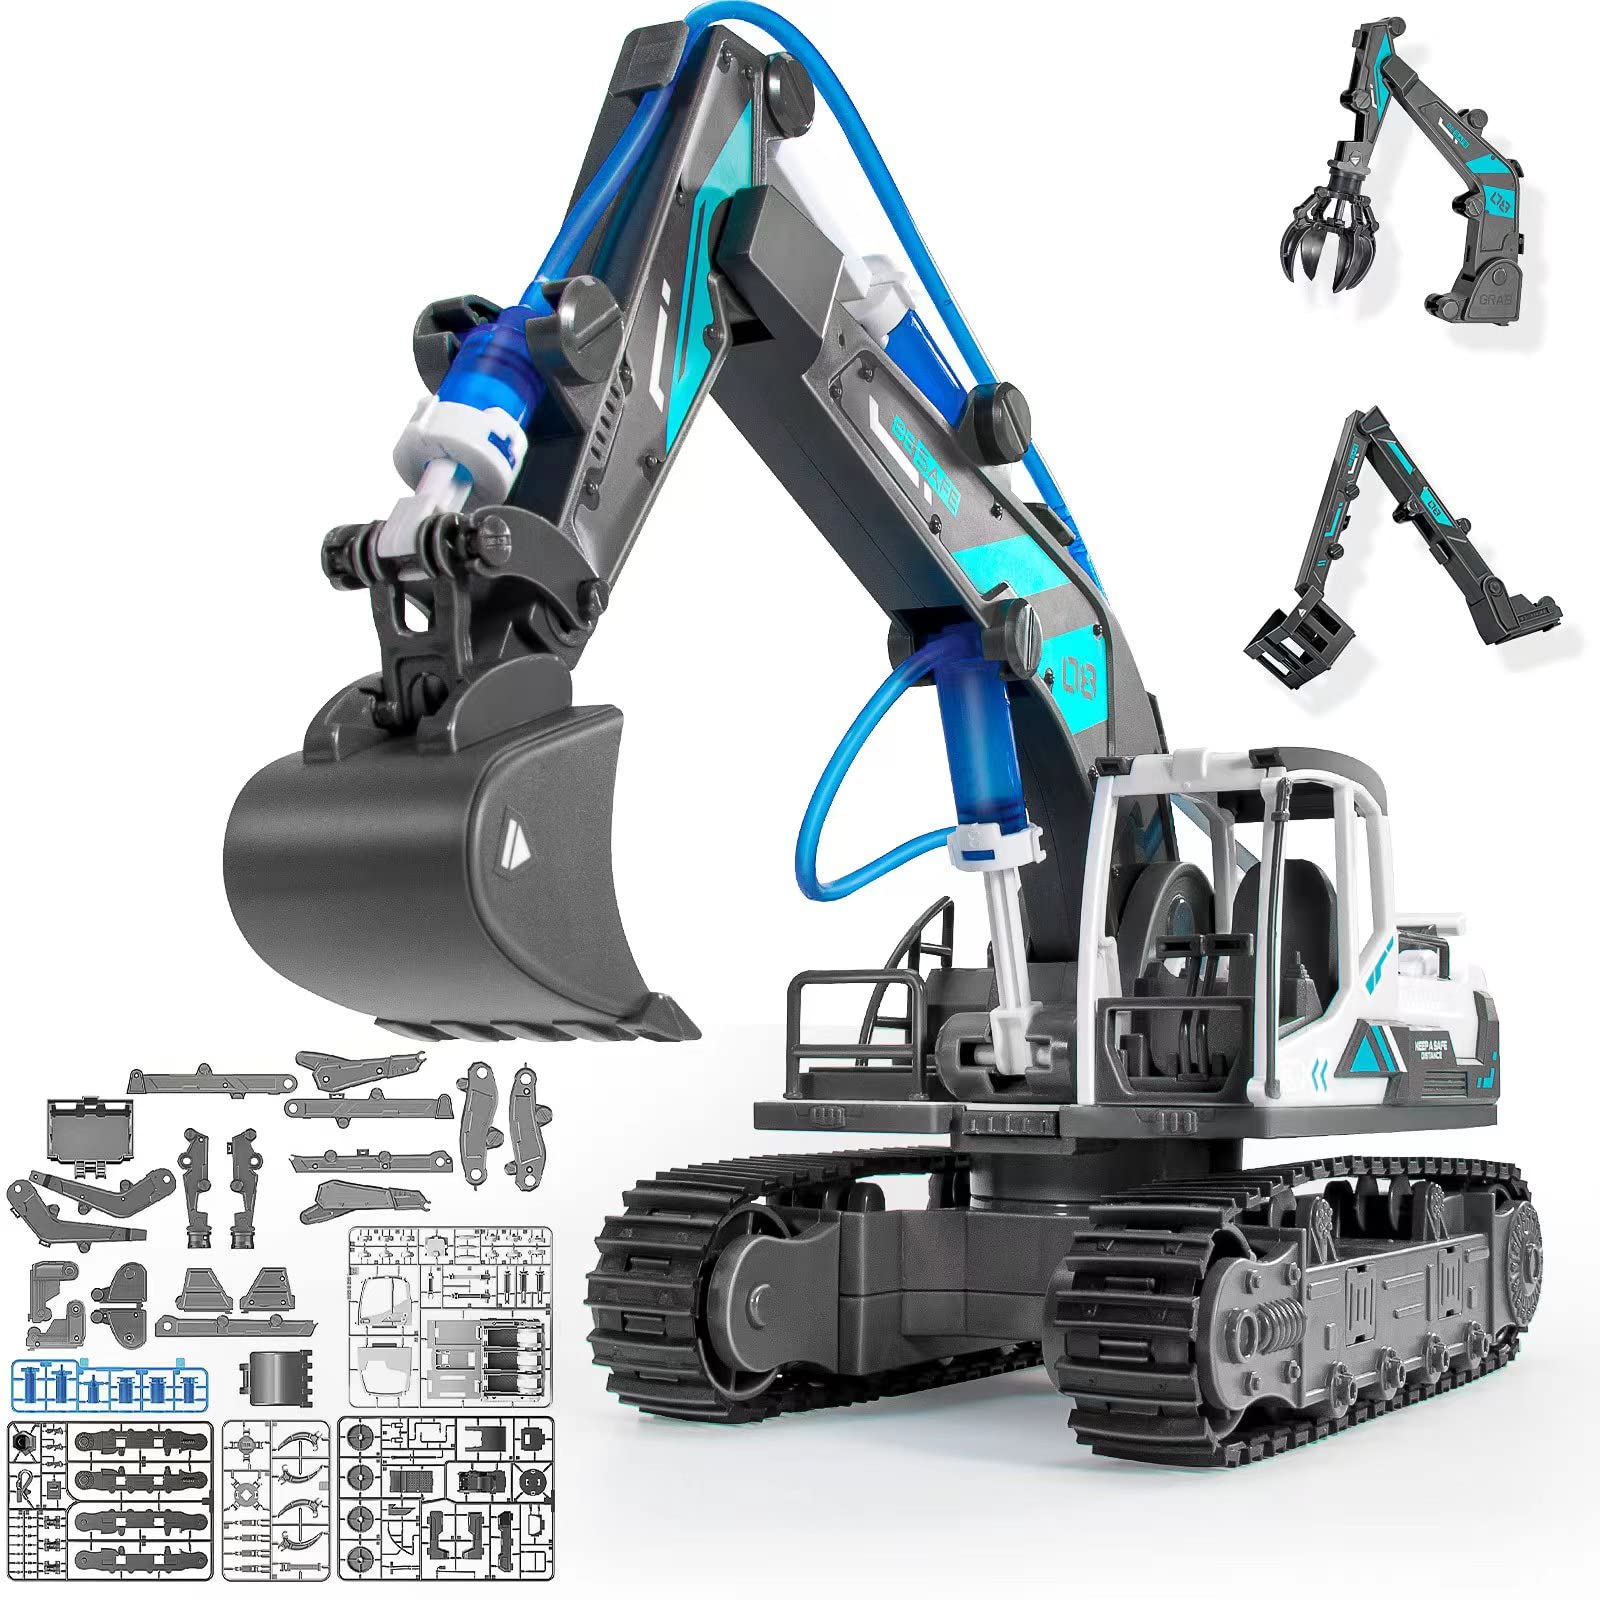 VANLINNY Robot Kits,RC Arm and Remote Control Excavator,2-in Science Kits - 2